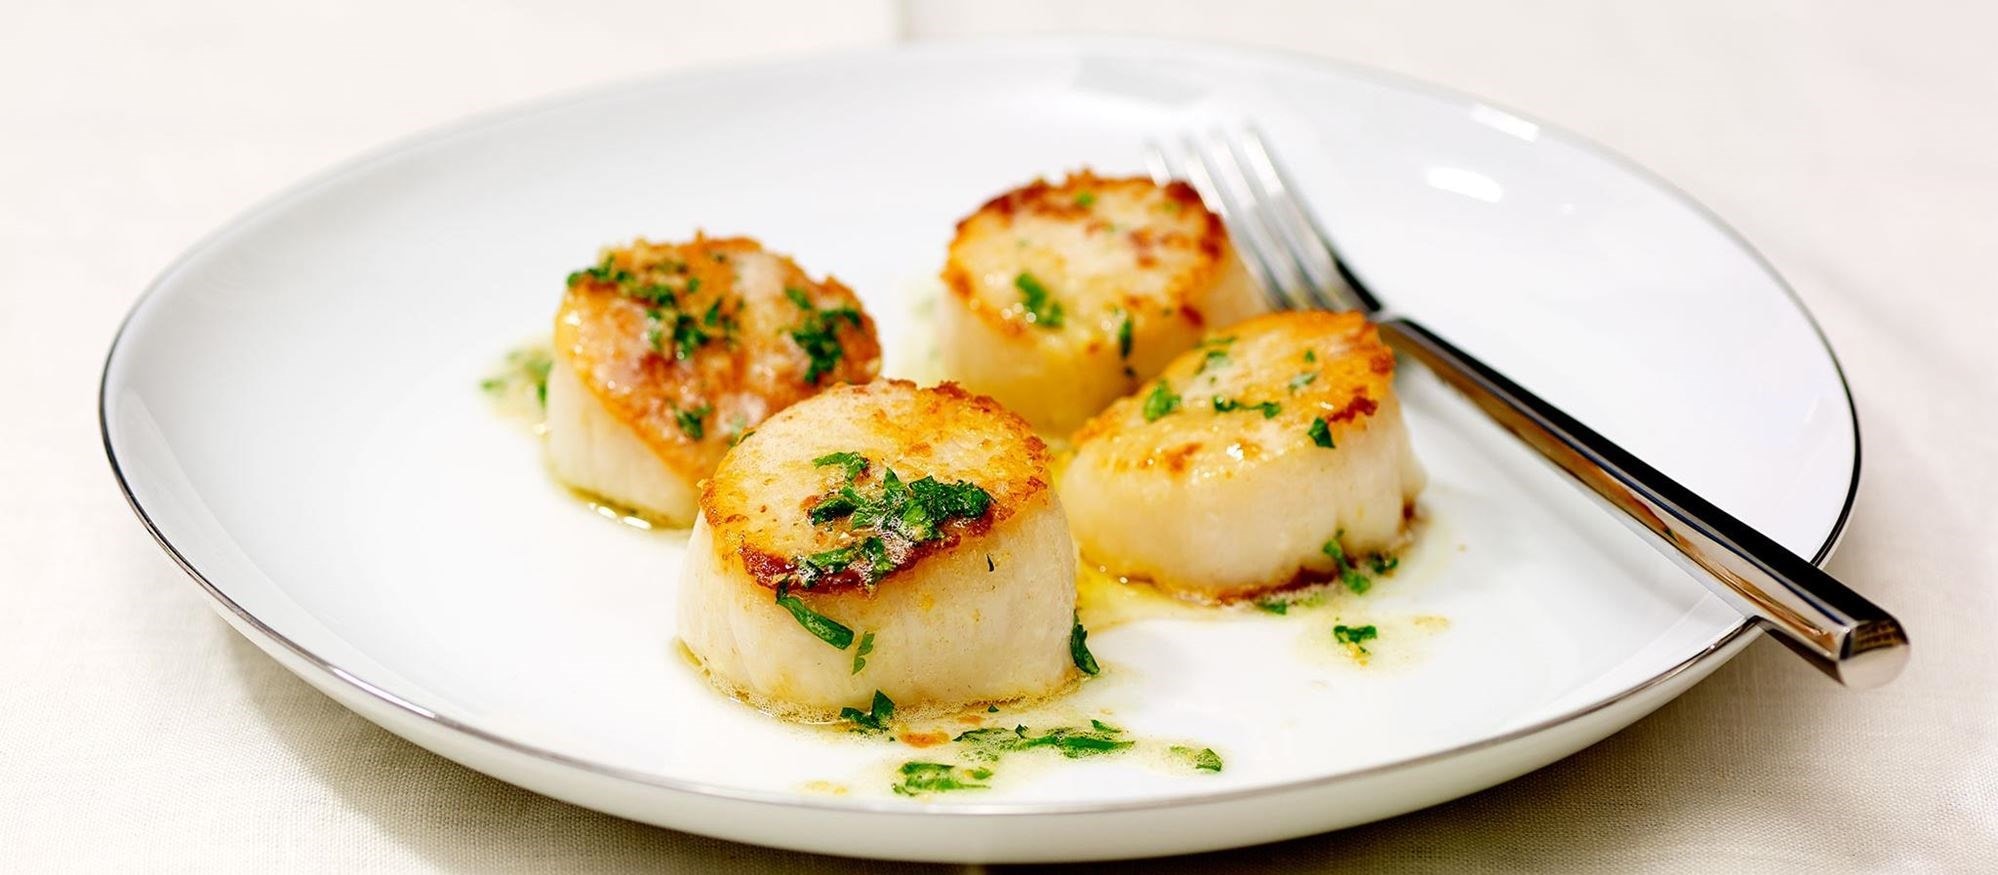 Scallops with Garlic-Parsley Butter